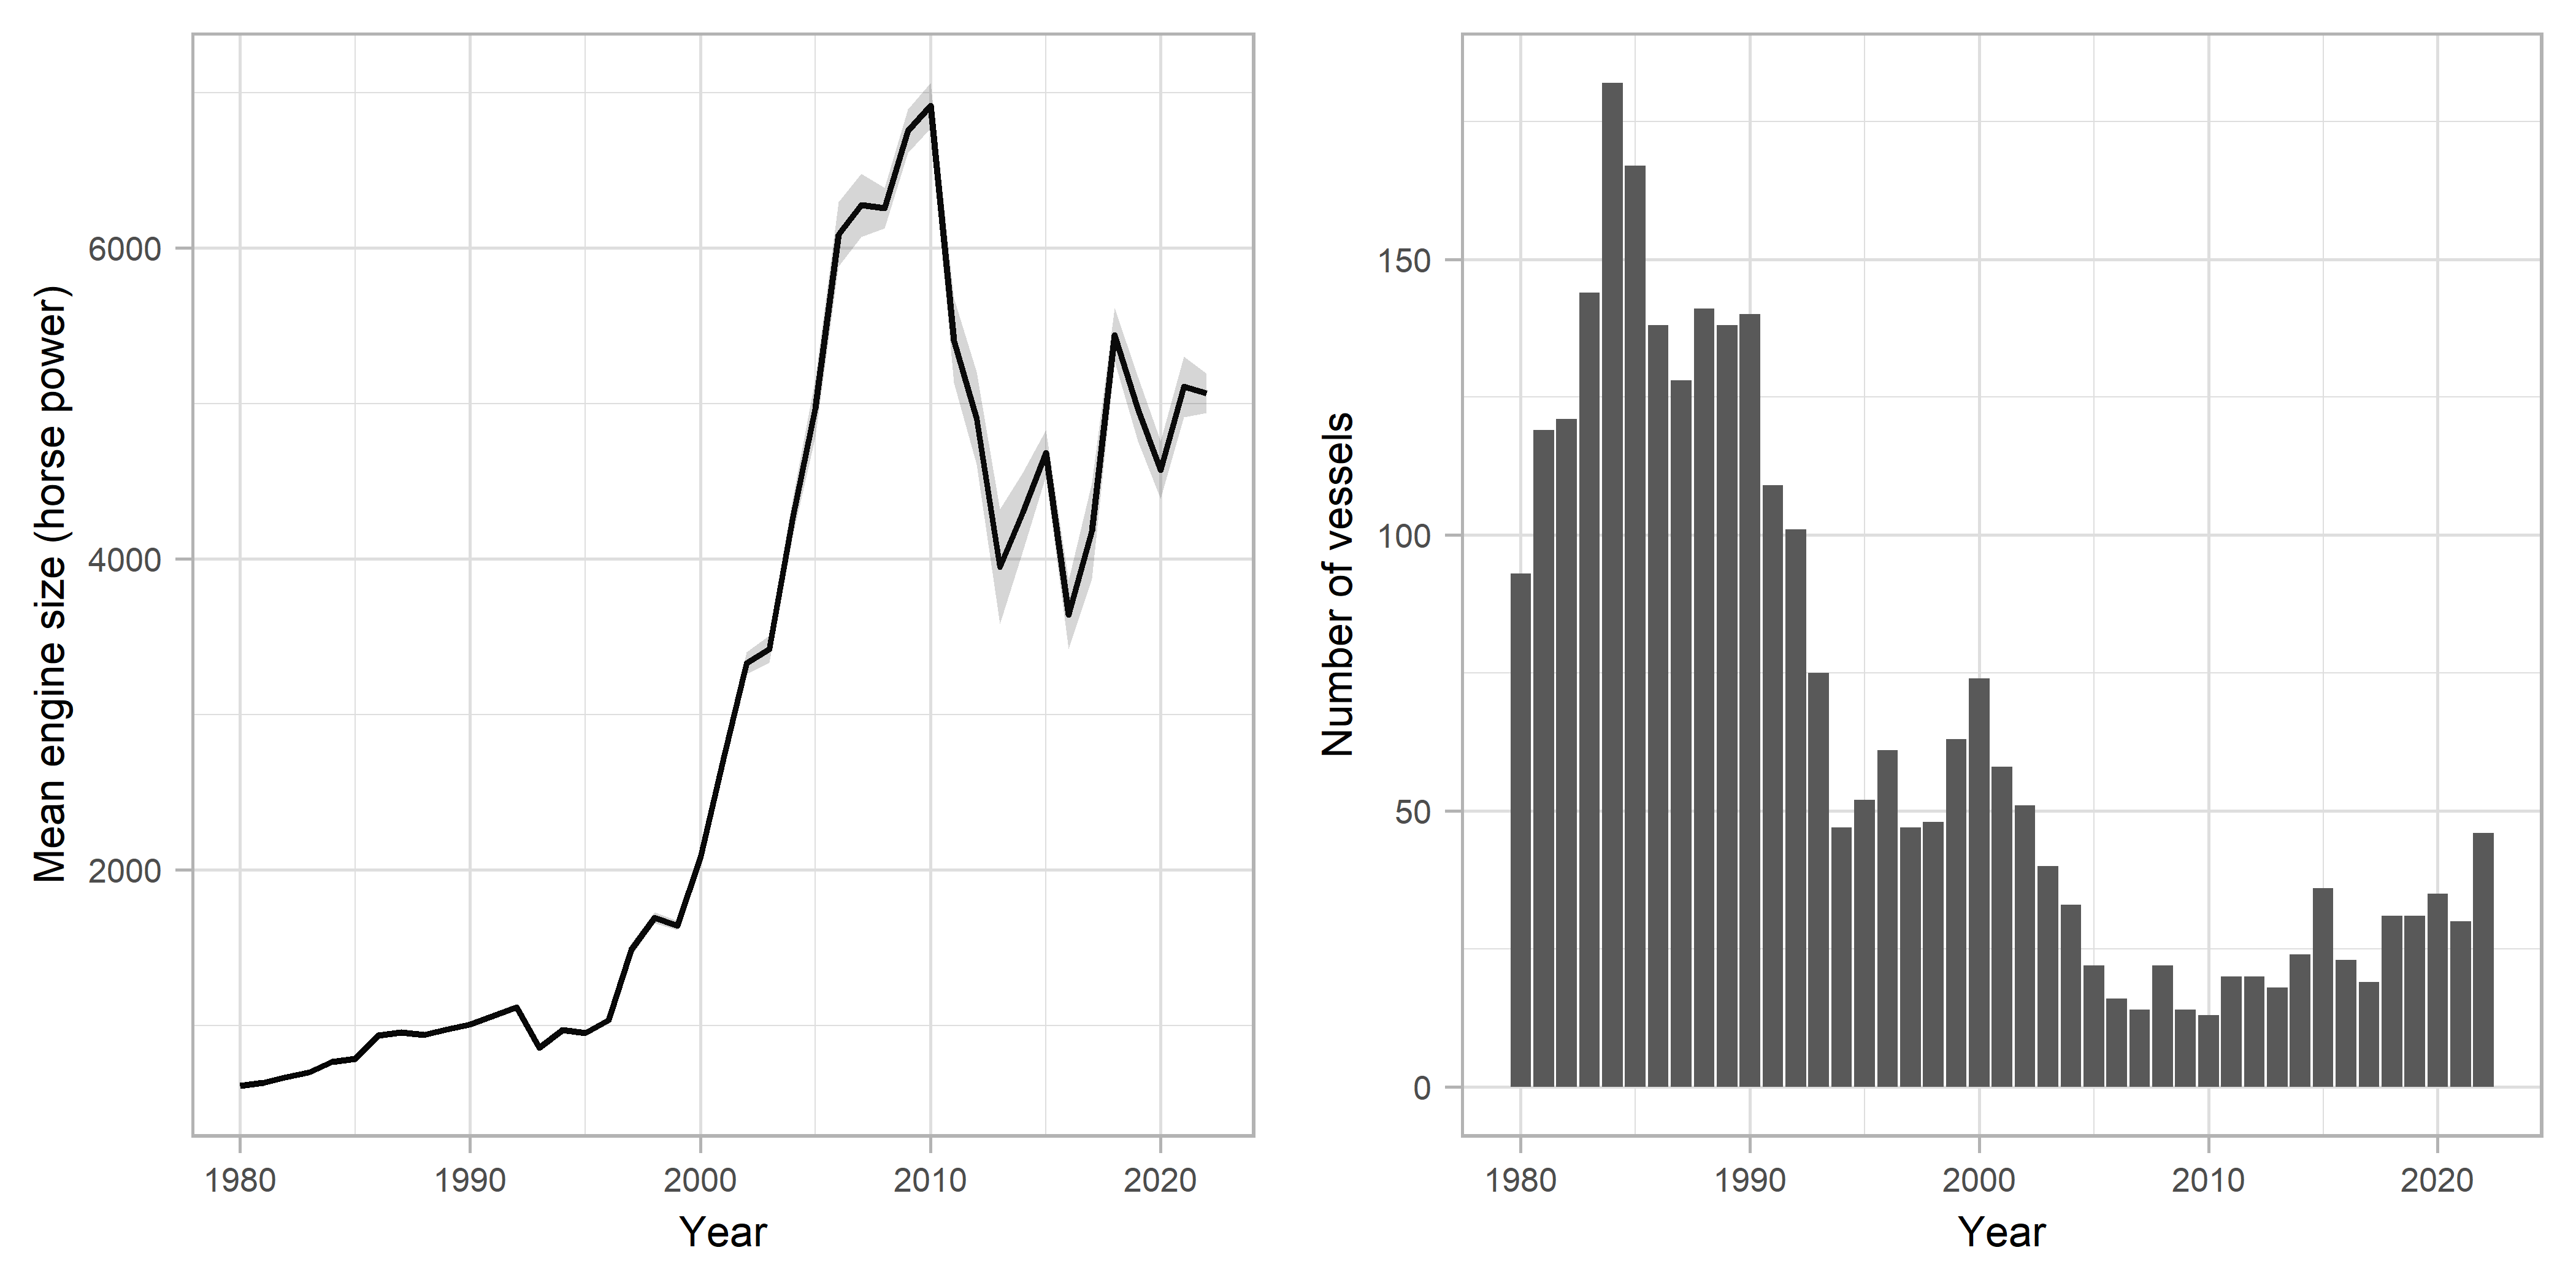 Mean engine size and number of vessels by year